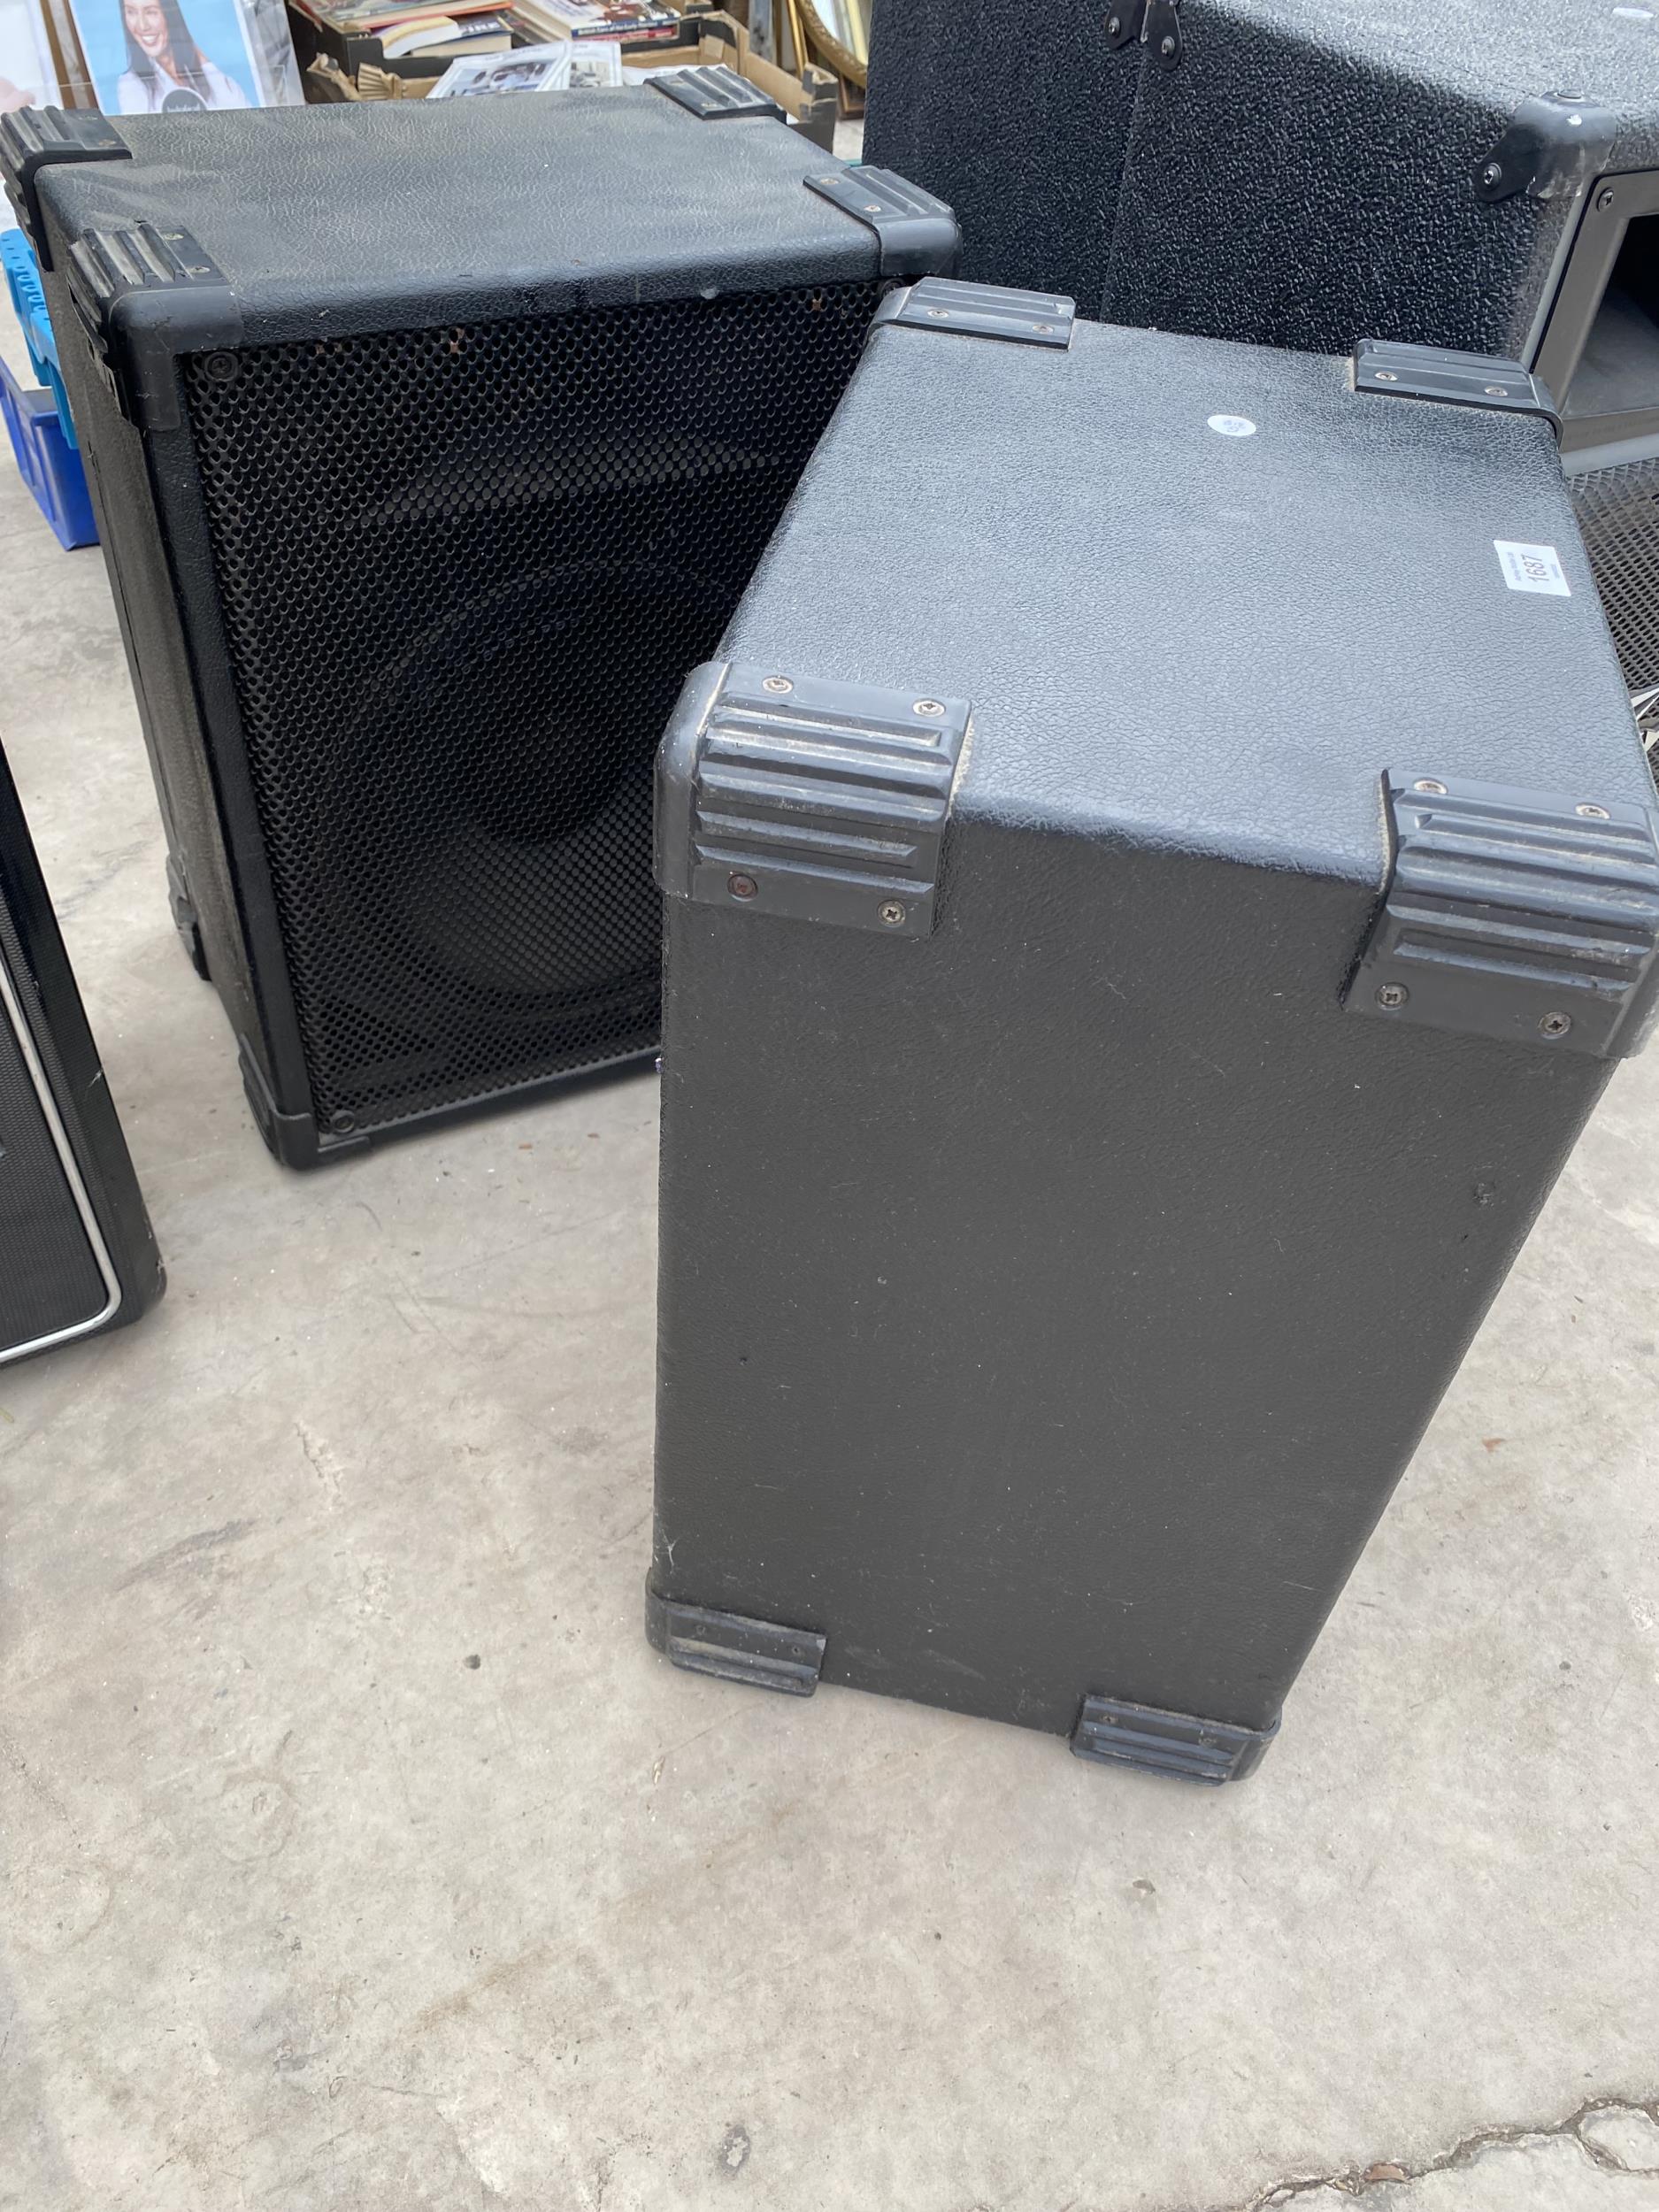 A PAIR OF LARGE SPEAKERS - Image 2 of 4